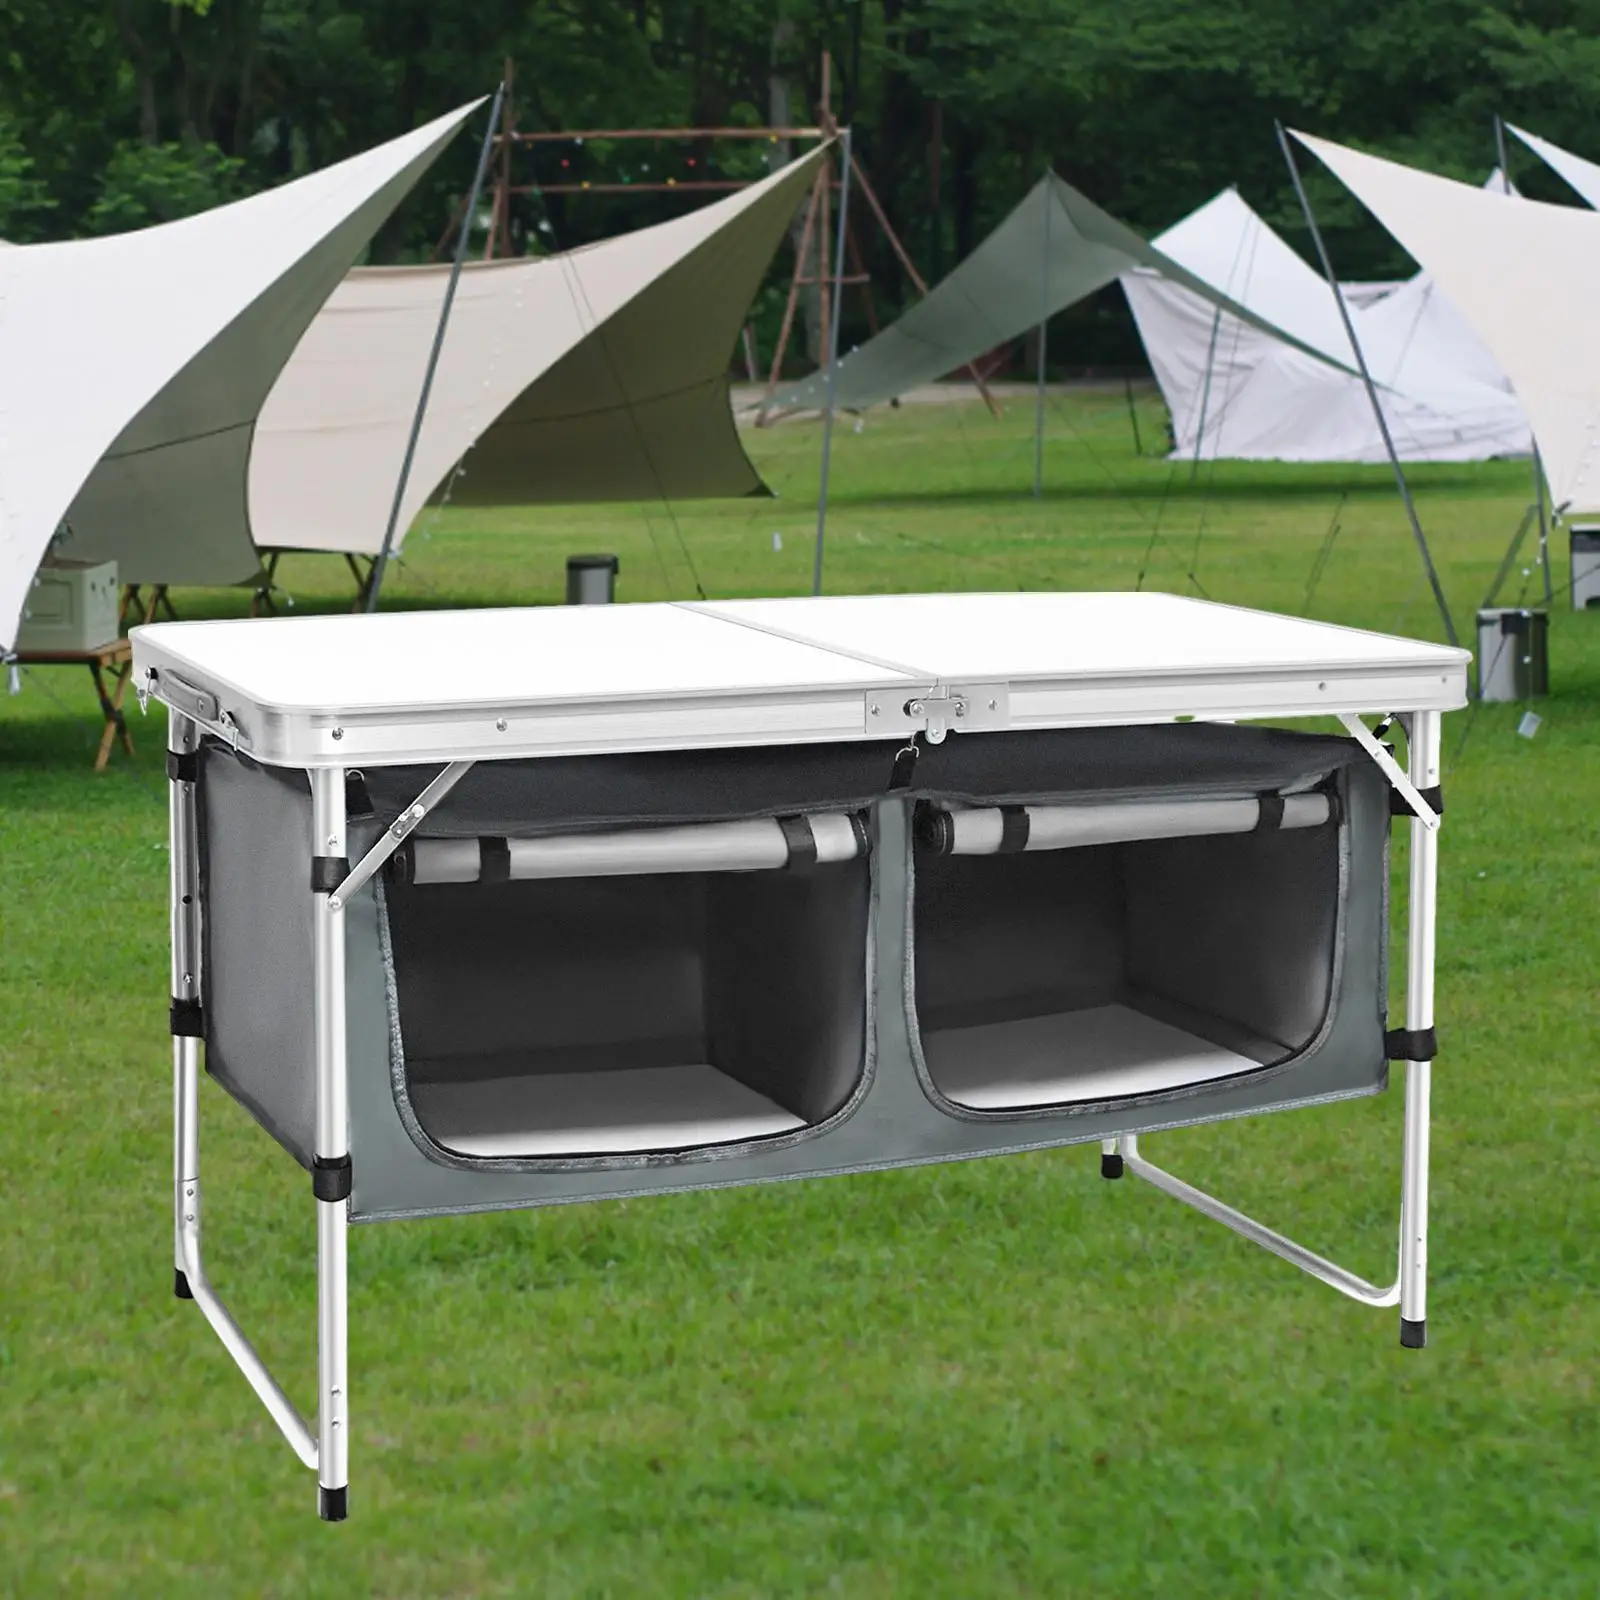 Folding Camping Picnic Table with Storage Compartment Sturdy Easy Carry with Adjustable Legs Lightweight Folding Outdoor Table